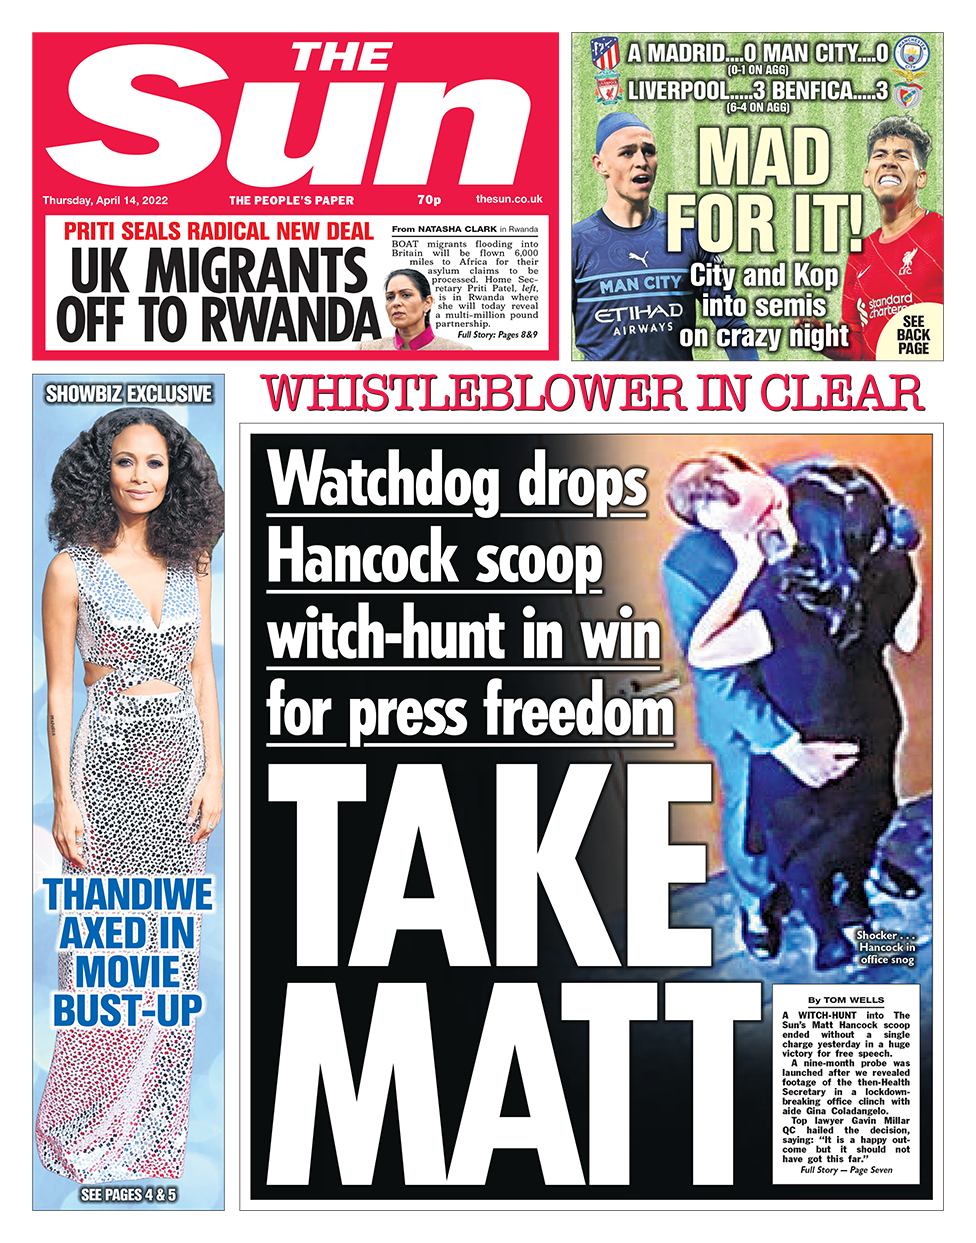 The headline in the Sun reads: "Watchdog drops Hancock scoop witch-hunt in win for press freedom"